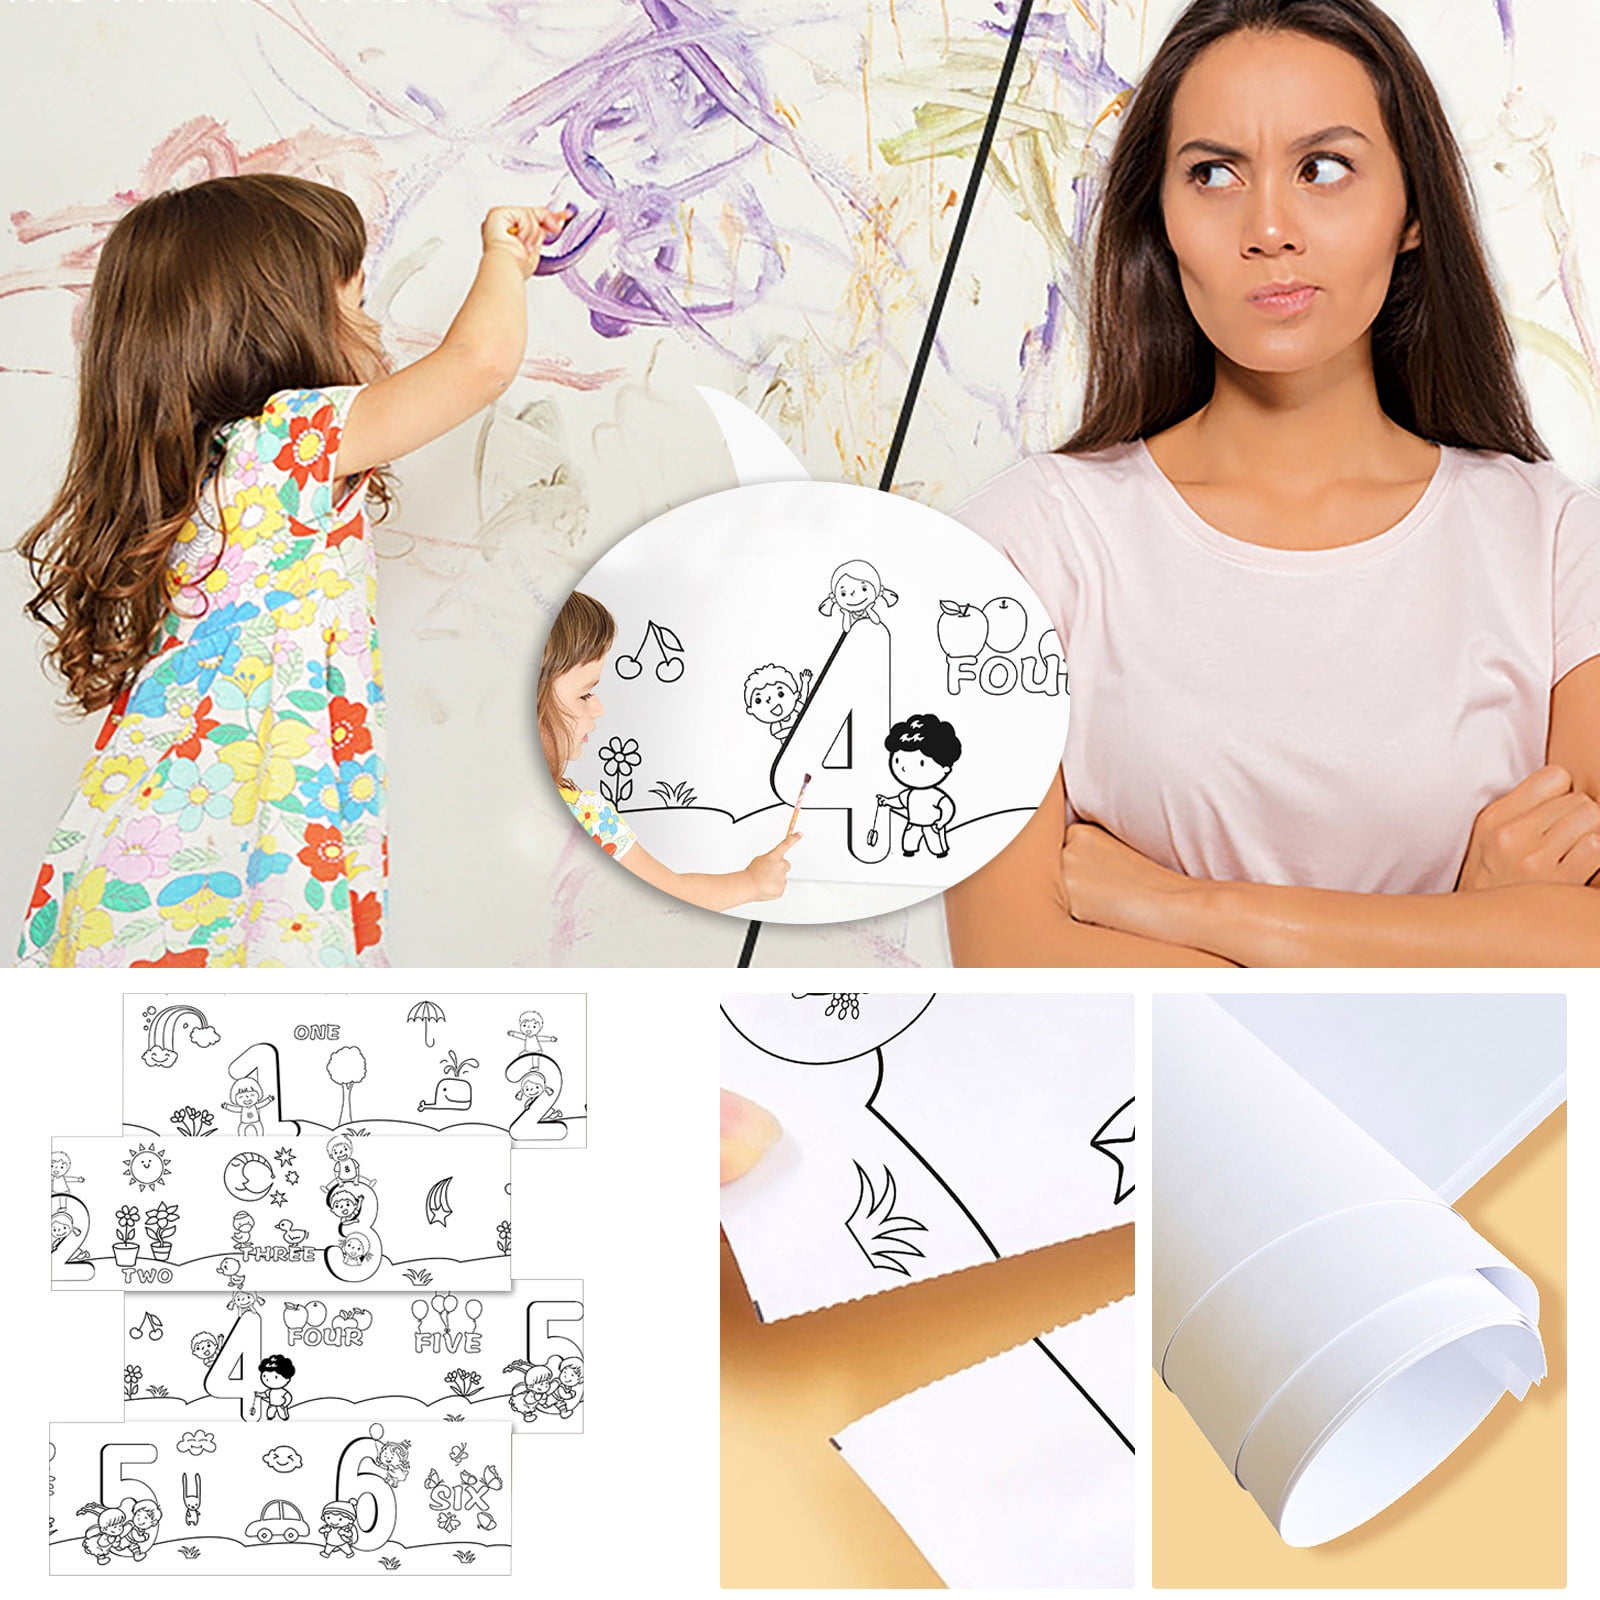  Childrens Drawing Roll, Coloring Paper Roll For